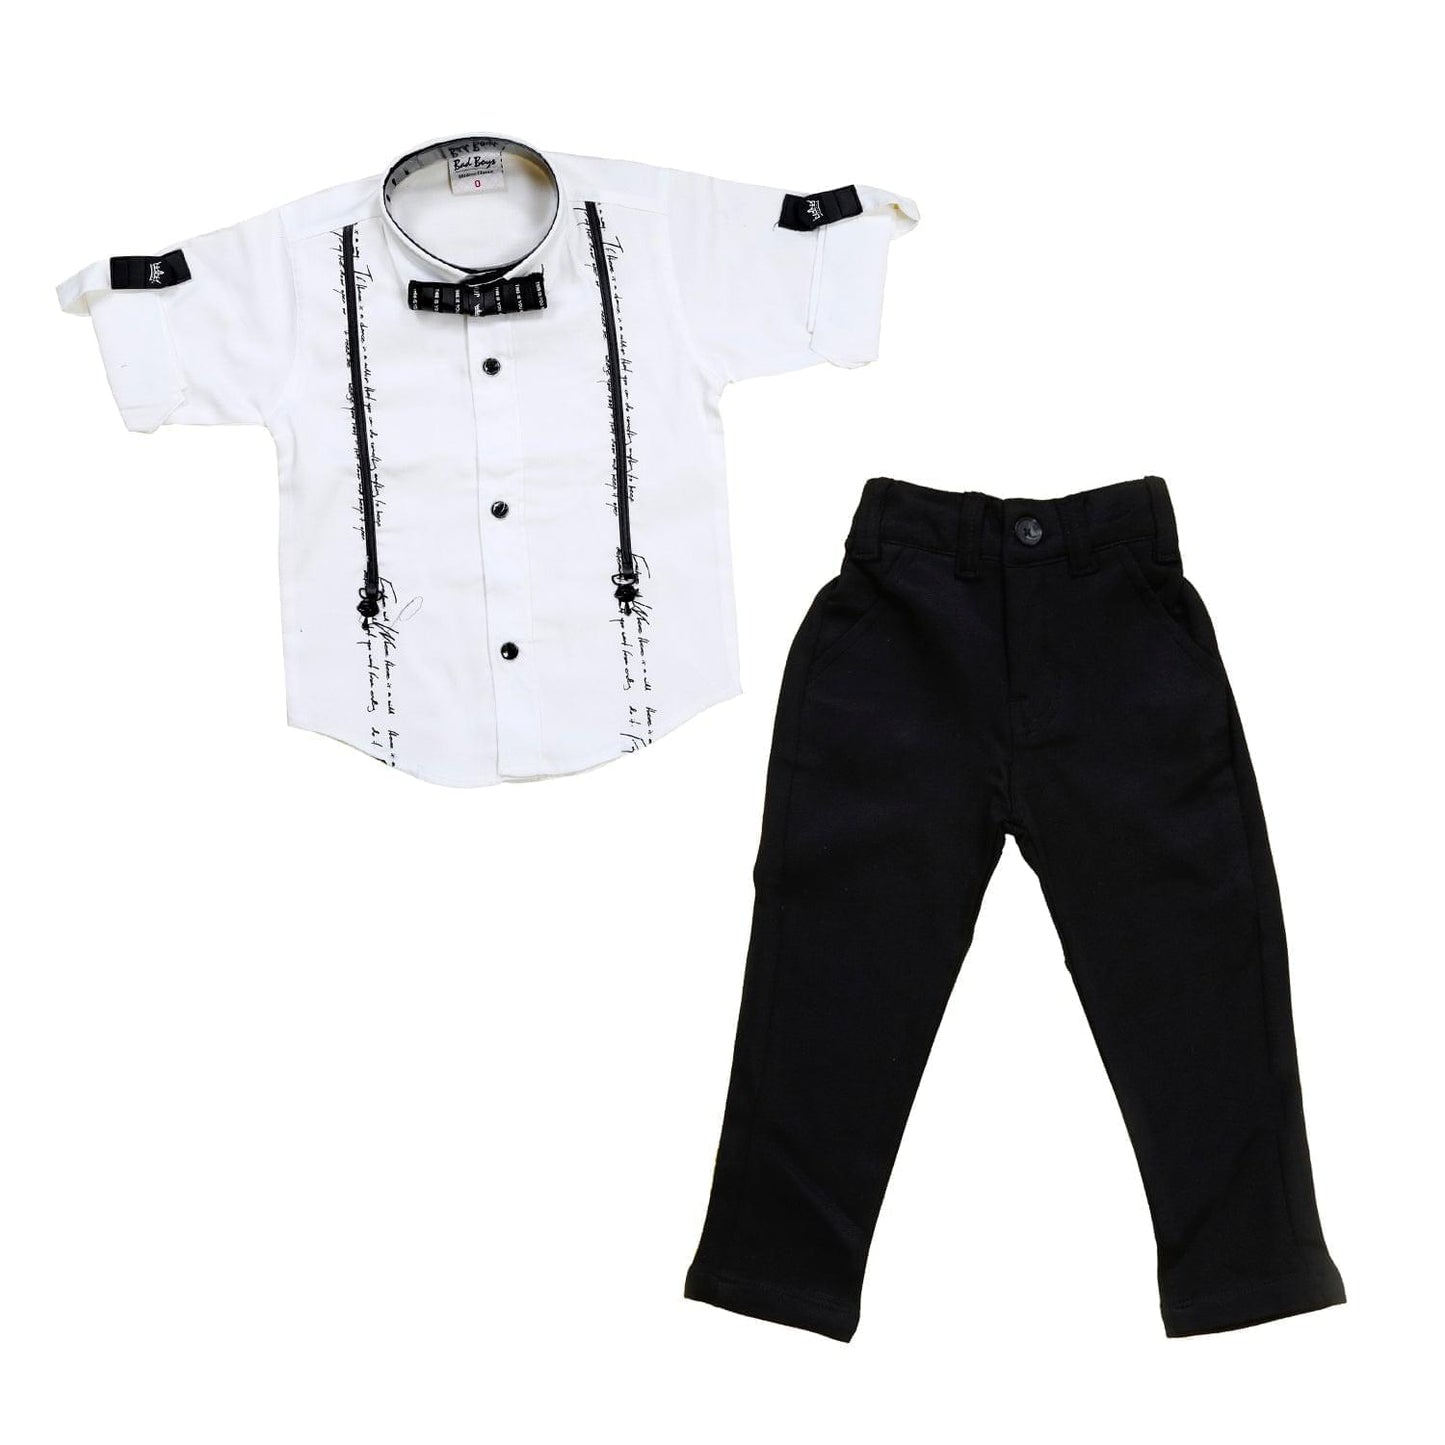 Bad Boys Comfortable yet stylish evening party outfit with a bow.